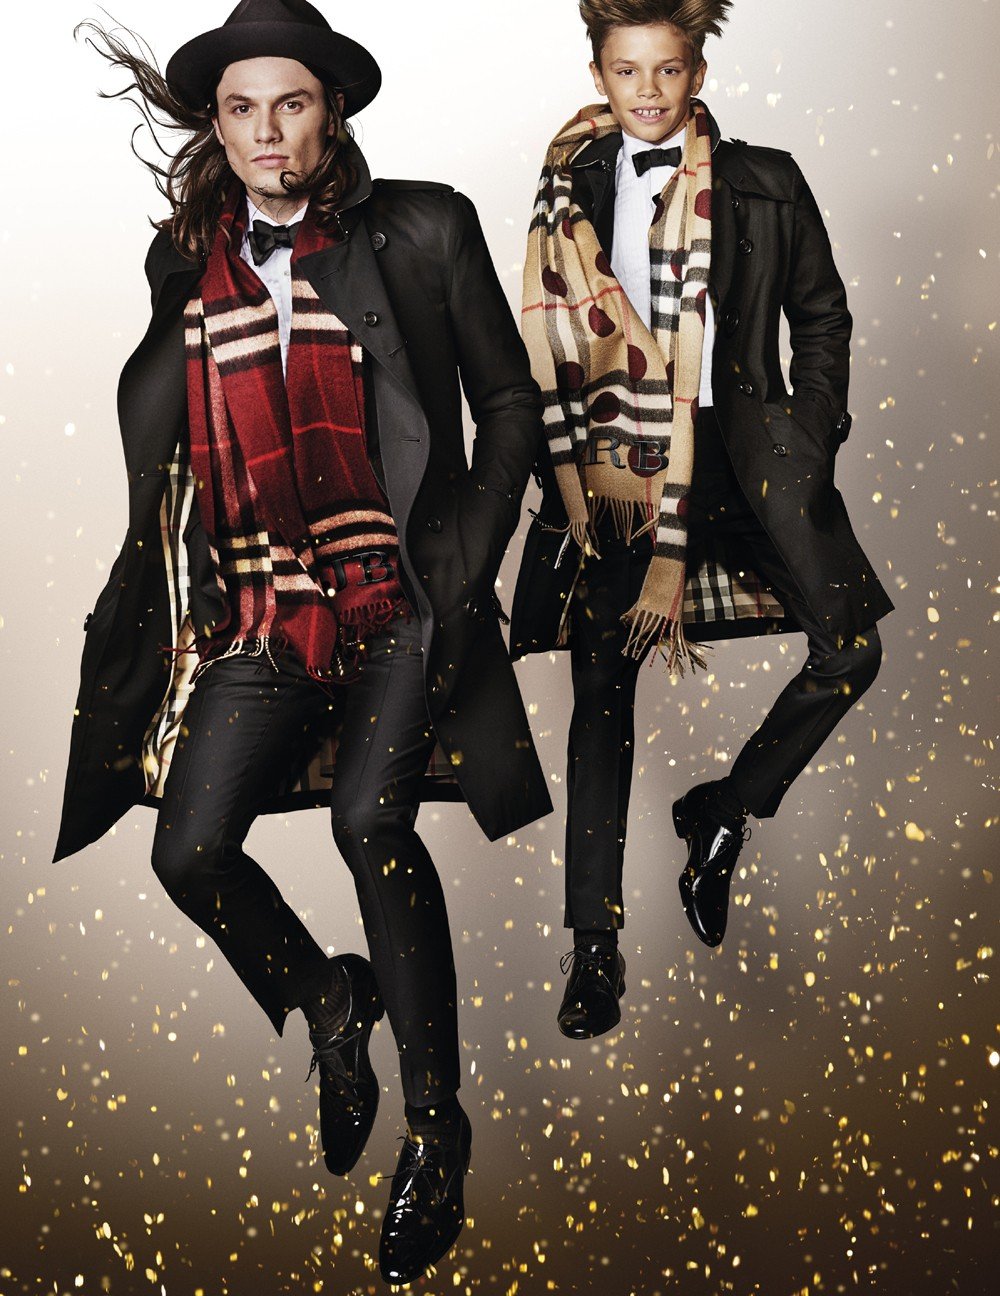 james_bay_and_romeo_beckham_in_the_burberry_festive_campaign_shot_by_mario_testino